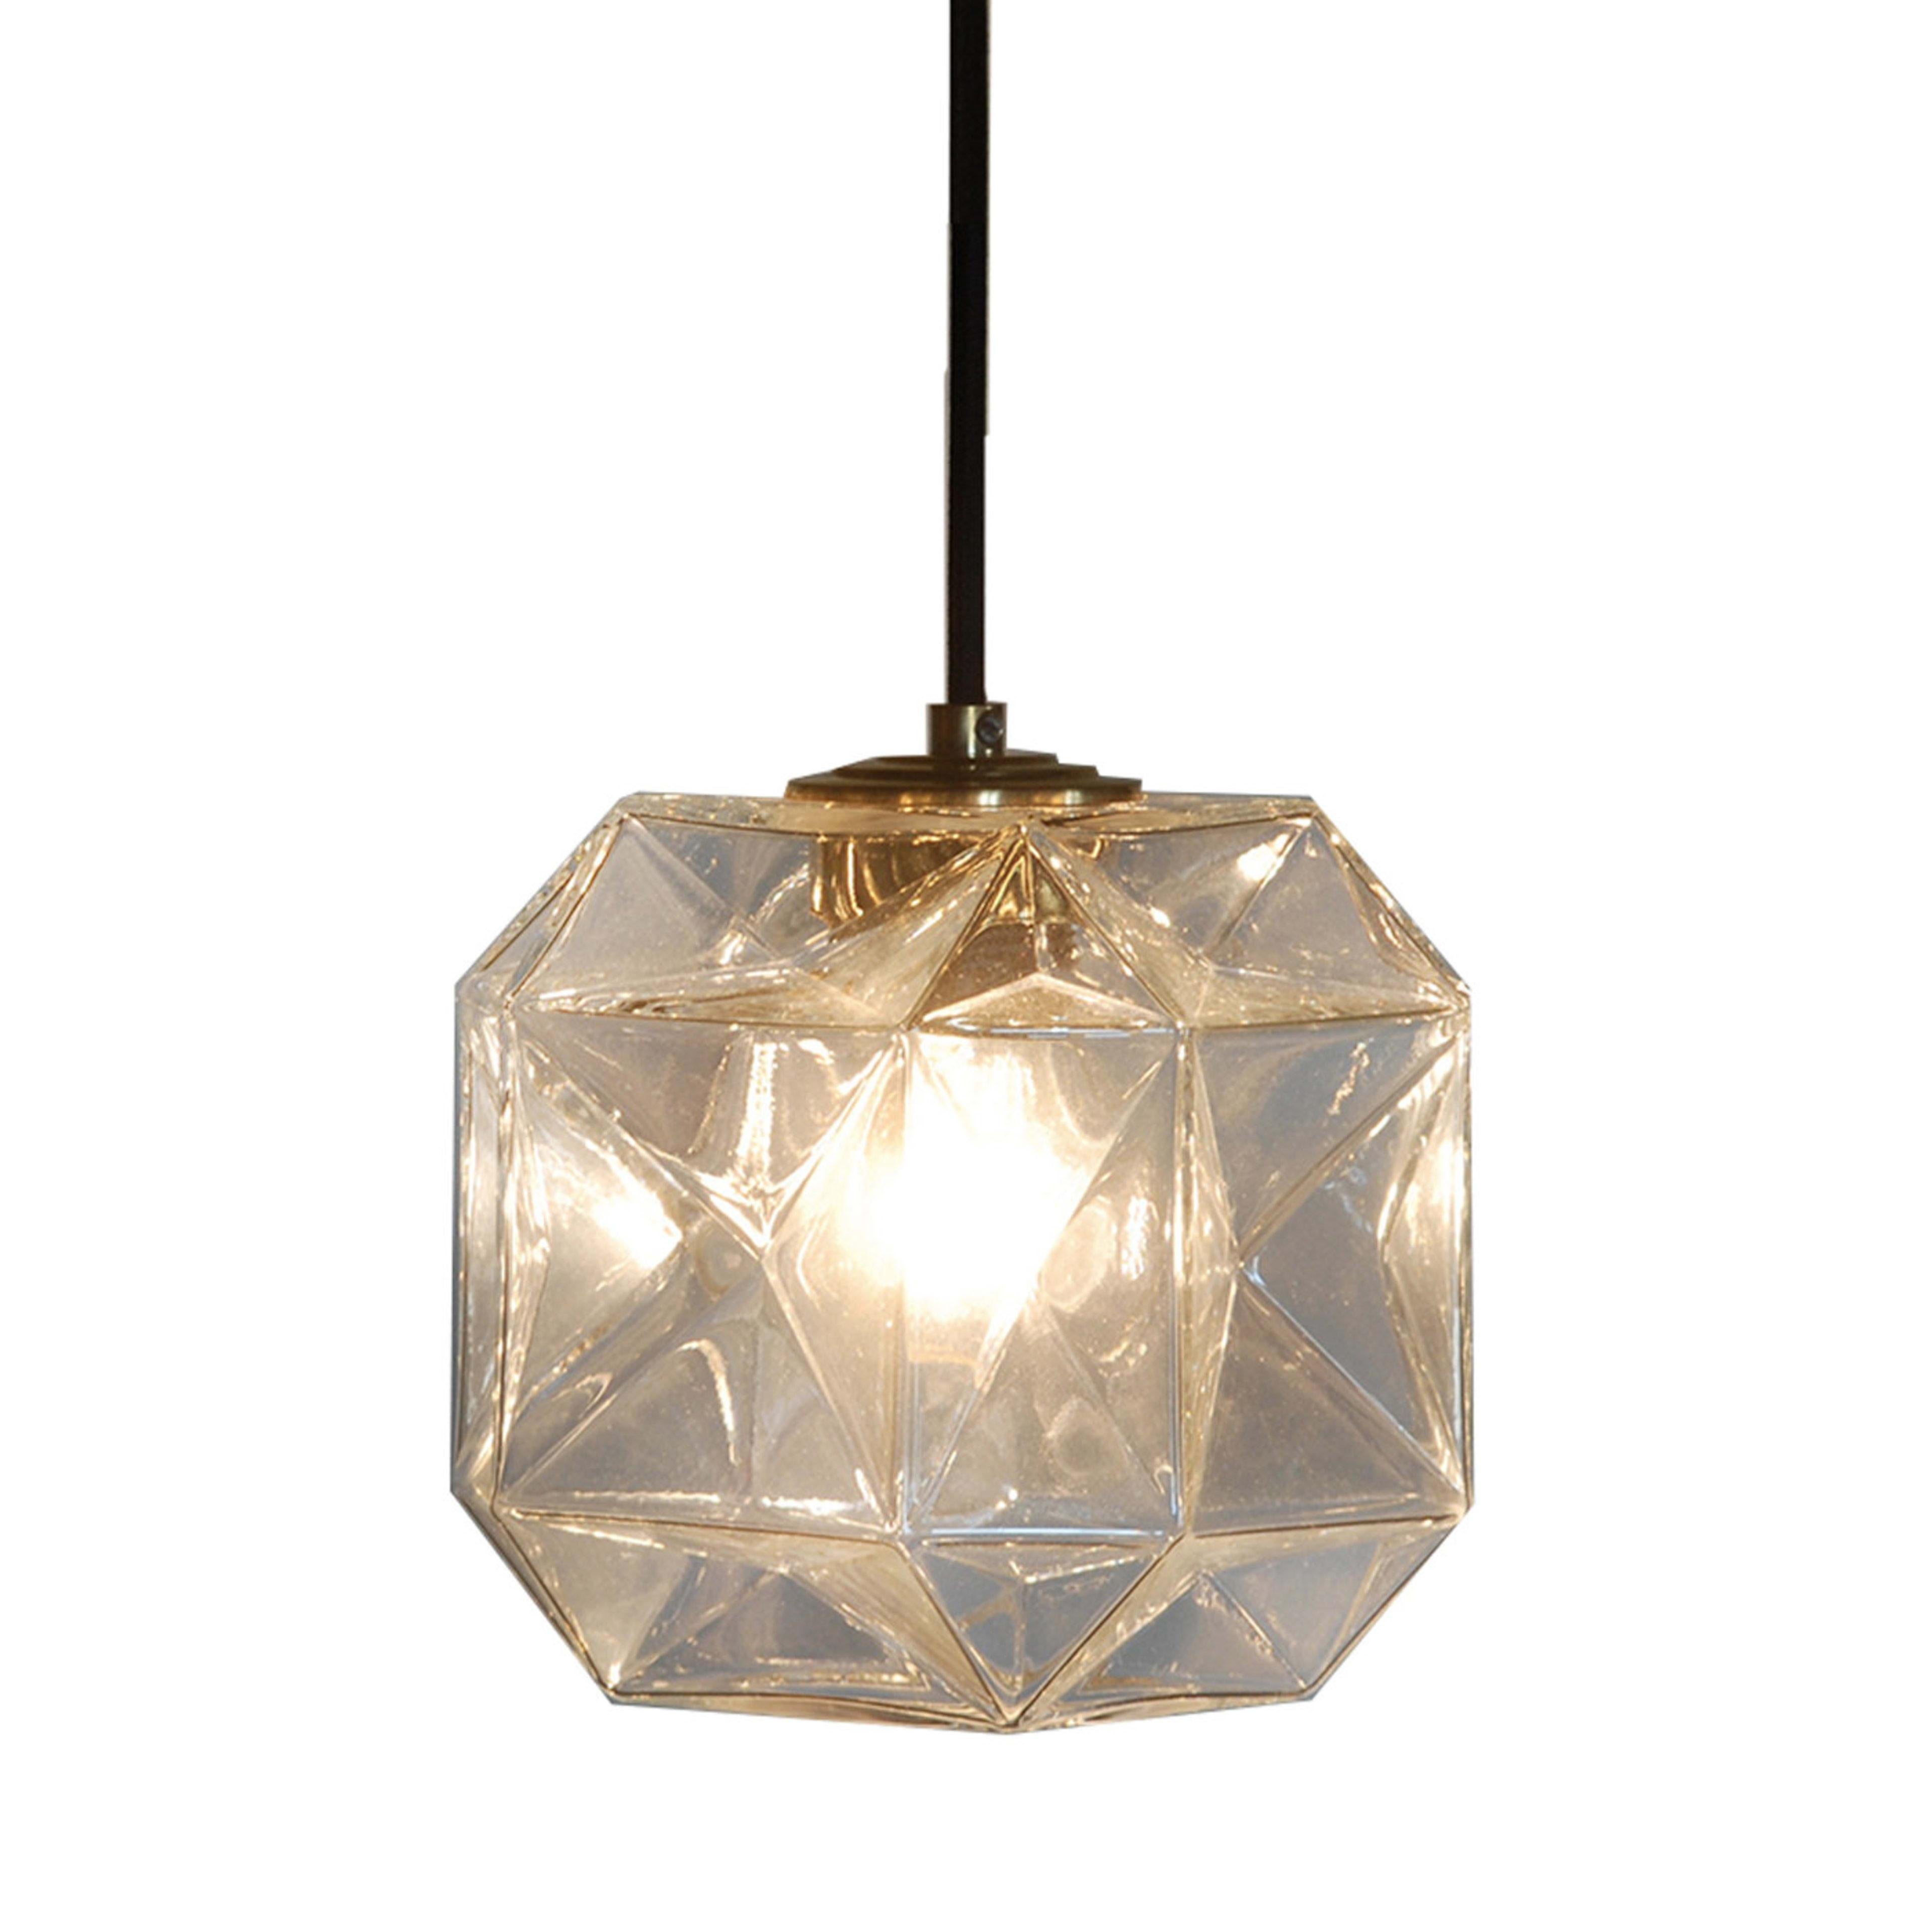 This suspended light features a unique and innovative shade constructed from mouth blown Venetian glass in the shape of a faceted cube. The different facets each catch the light producing interesting reflections and illuminating the space. This